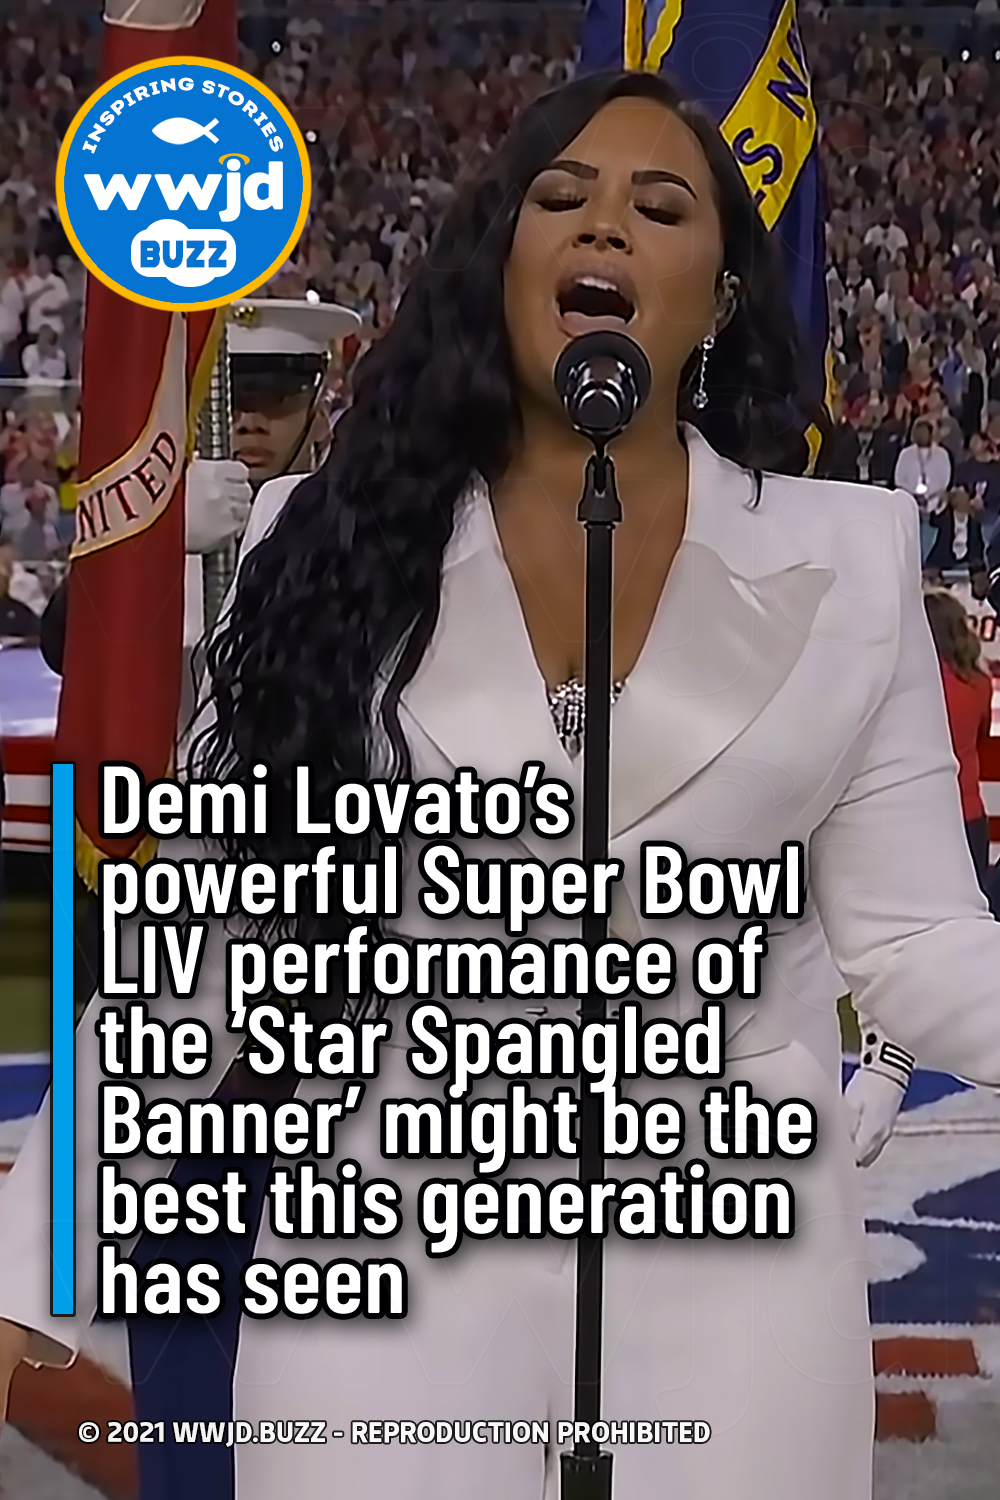 Demi Lovato’s powerful Super Bowl LIV performance of the ‘Star Spangled Banner’ might be the best this generation has seen